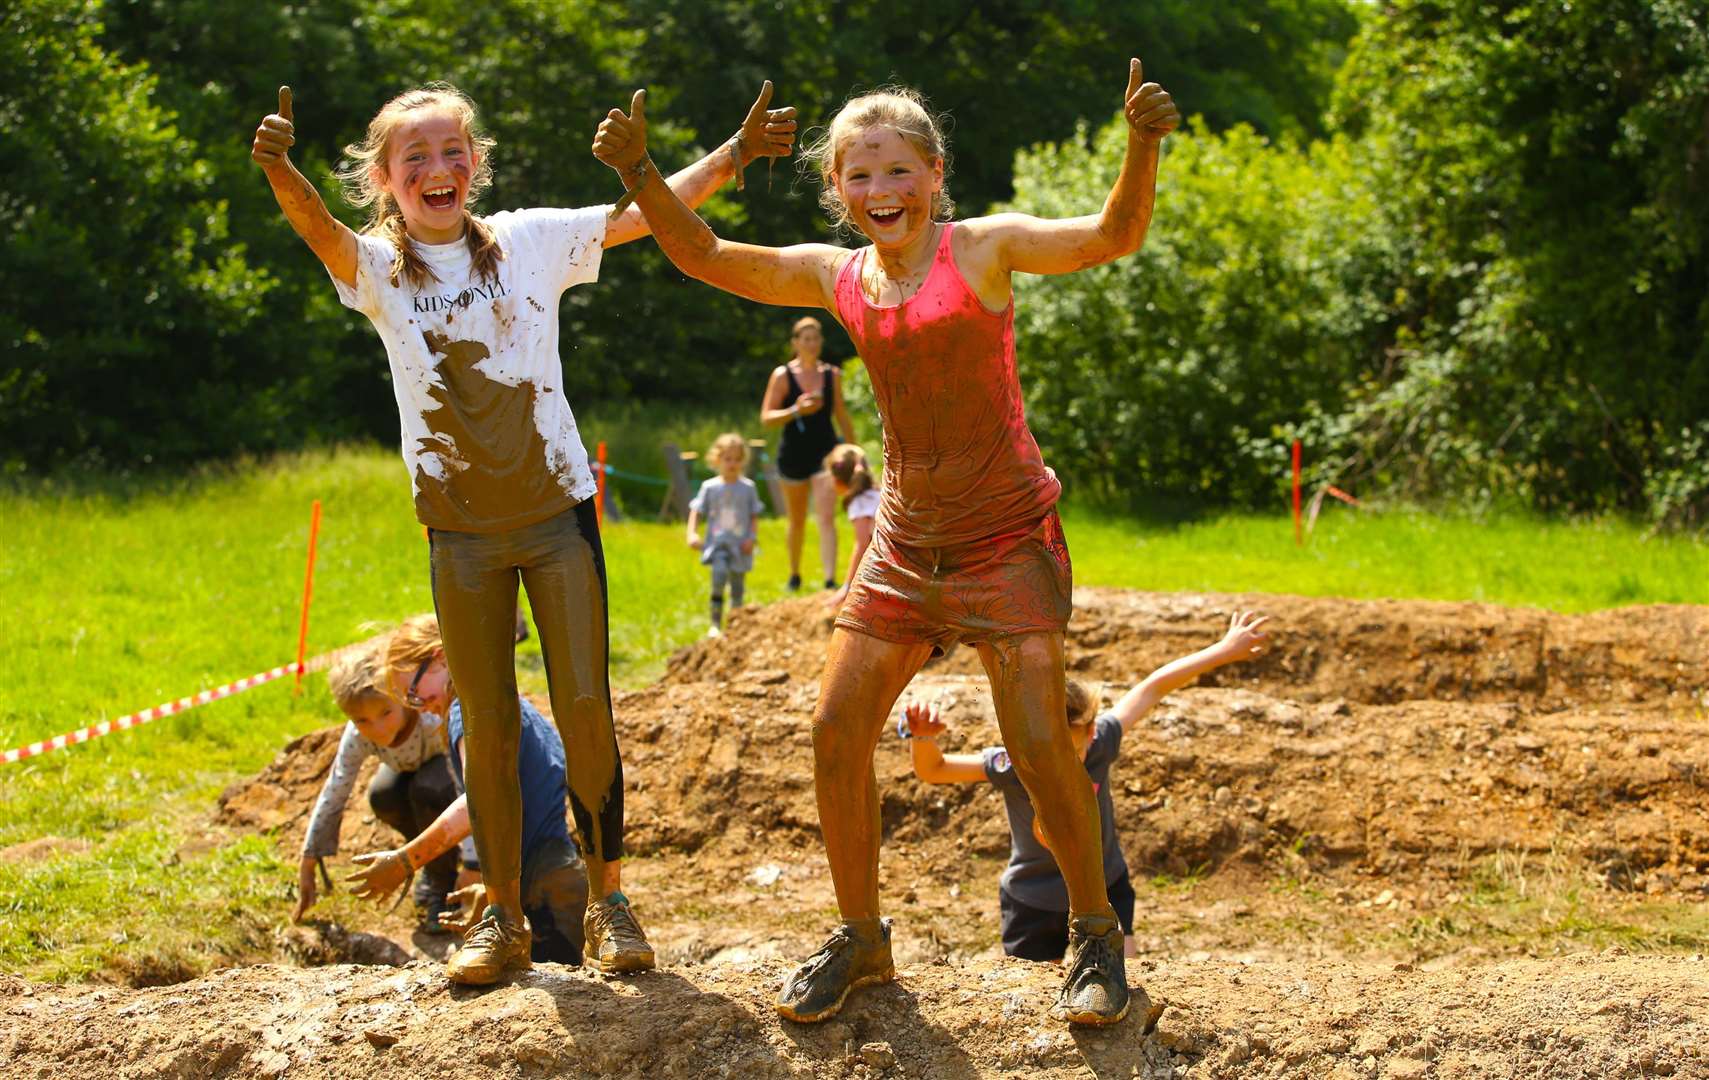 The Little Welly is muddy fun for families